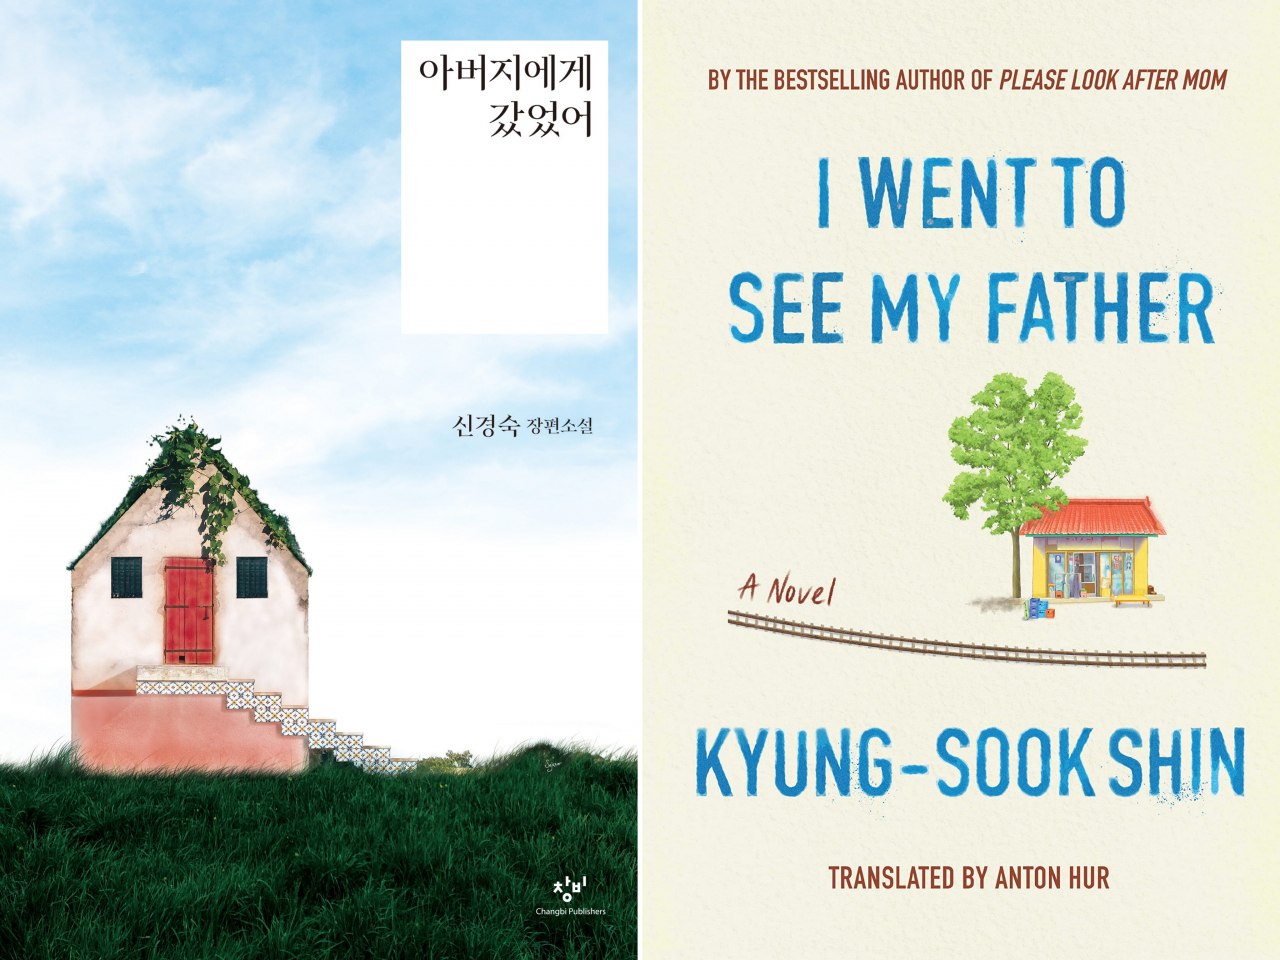 The Korean edition (left) and the English edition of 